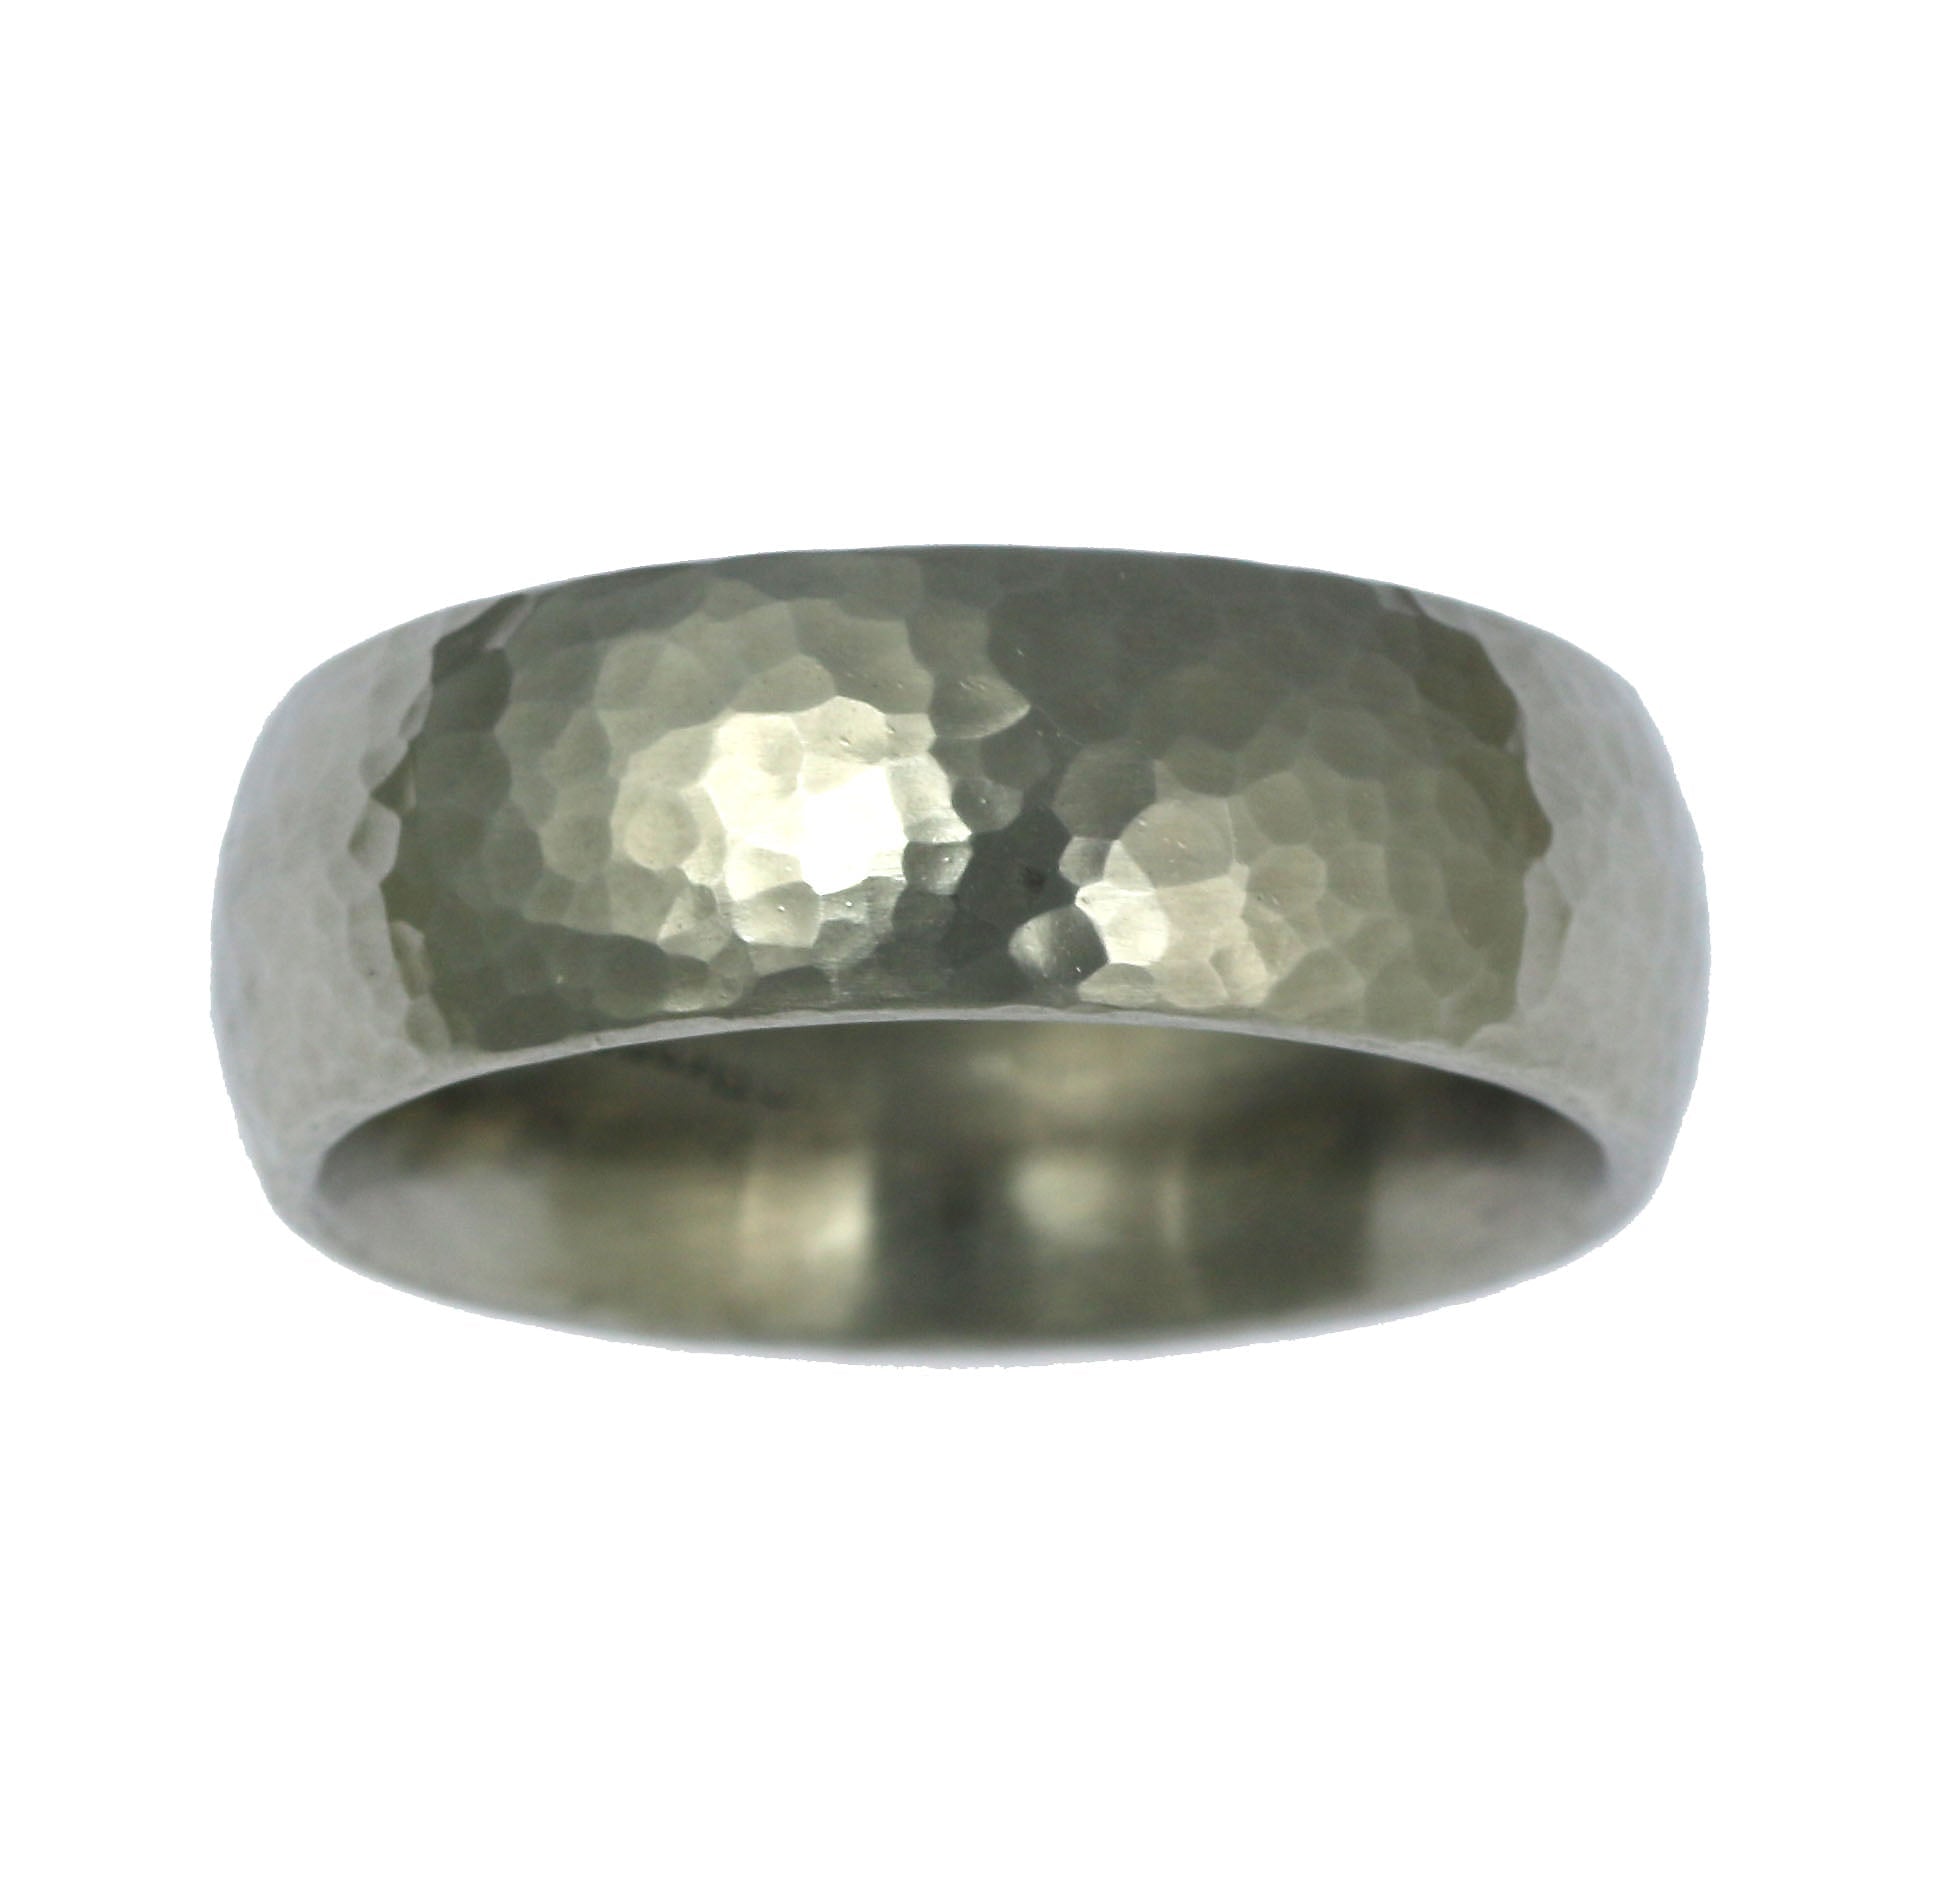 Top of 8mm Hammered Domed Stainless Steel Men's Ring